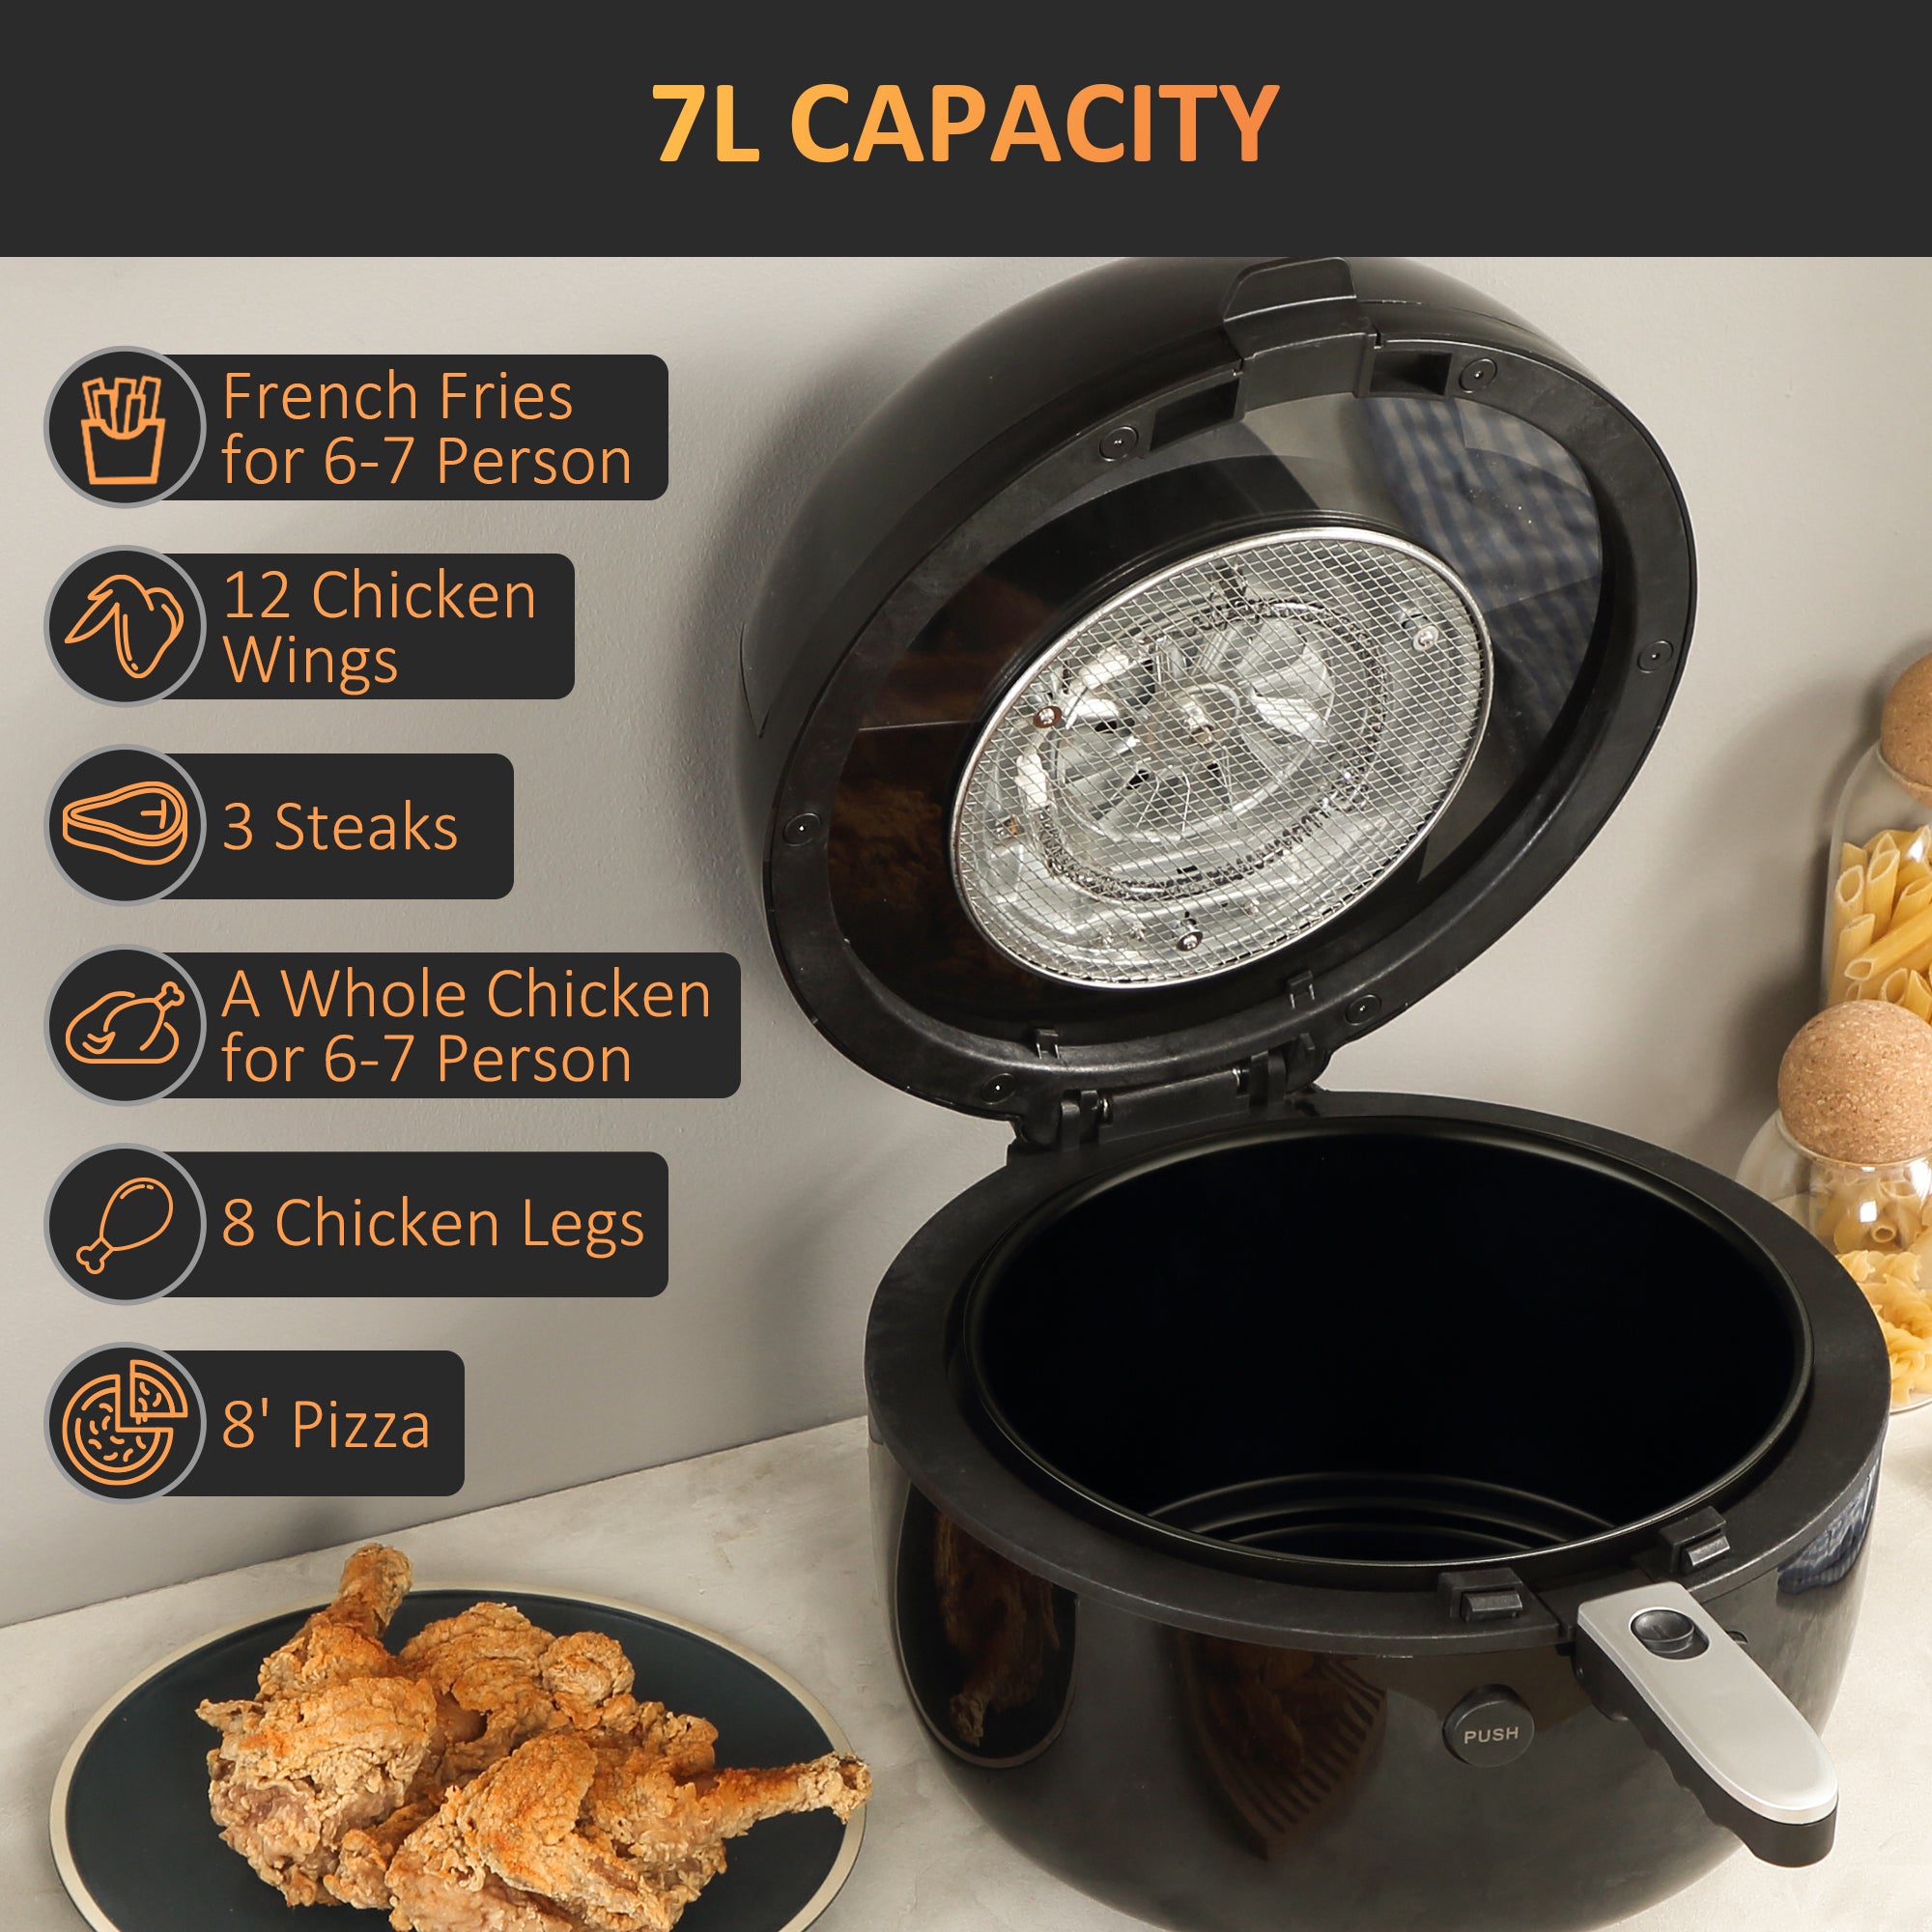 HOMCOM 7L Digital Air Fryer Oven with Air Fry, Roast, Broil, Bake, Dehydrate, 7 Presets, Rapid Air Circulation, 60-Minute Timer and Non-stick Basket